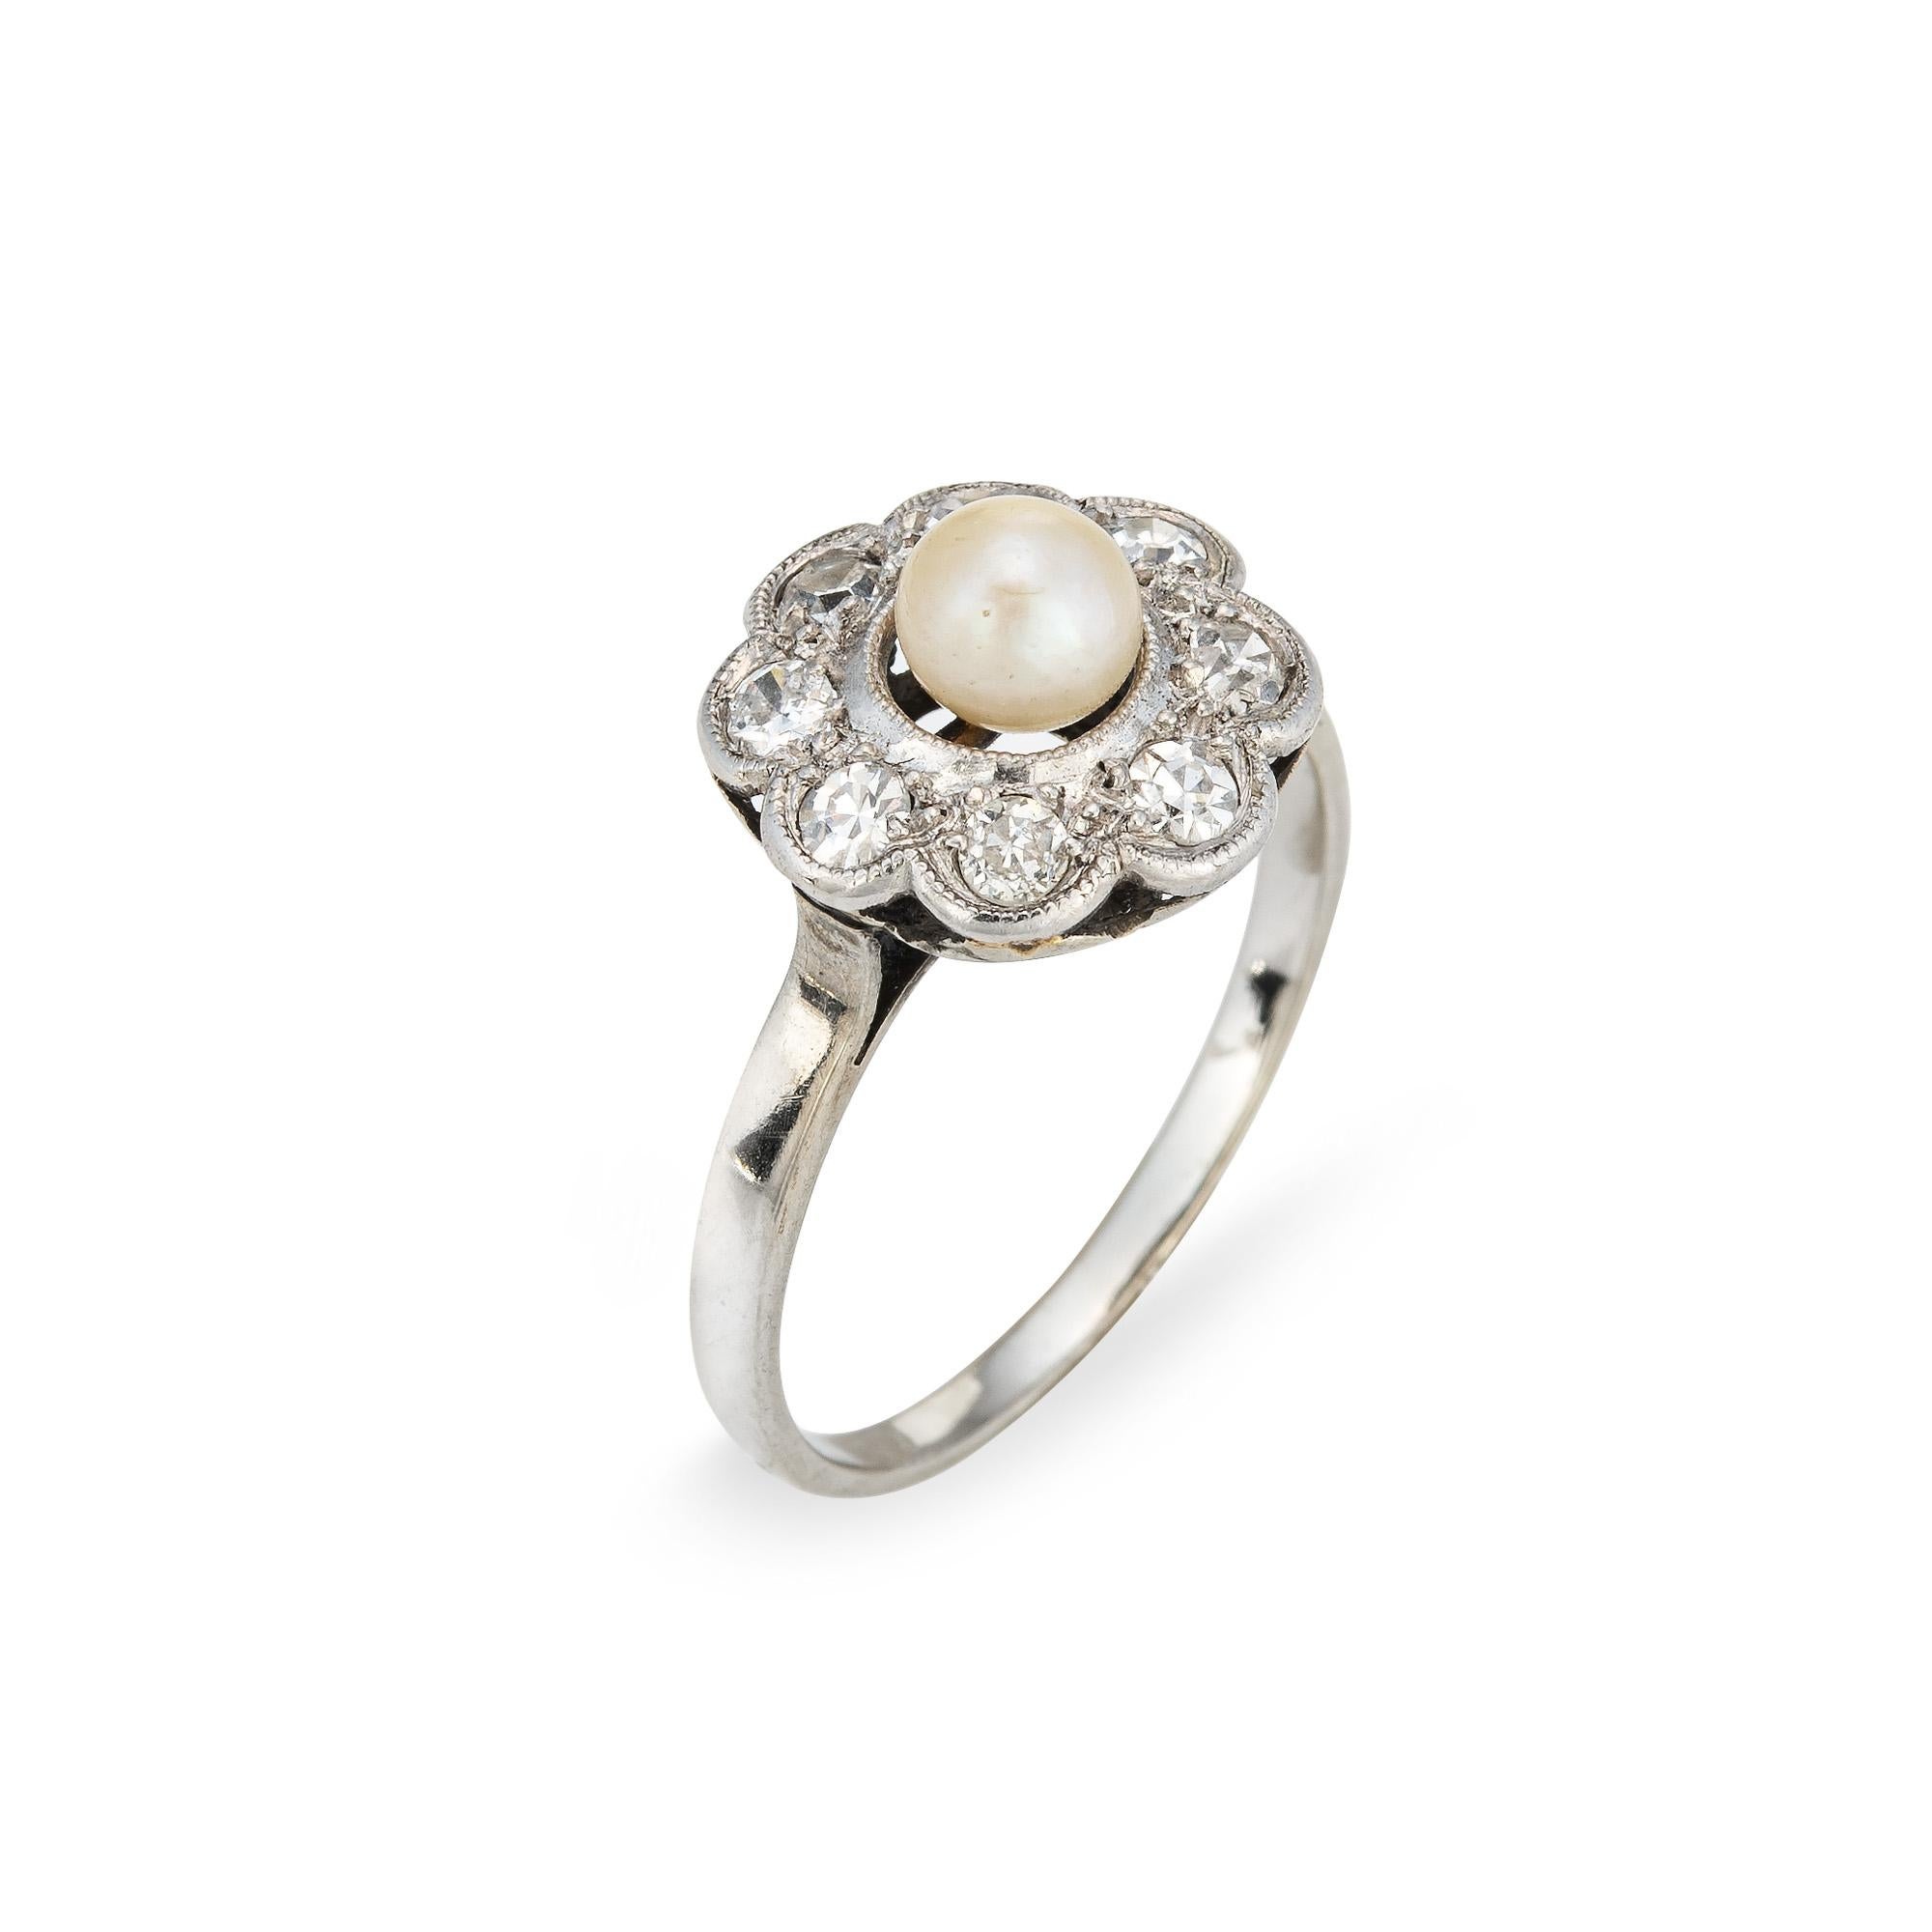 Stylish antique Edwardian pearl & diamond cluster ring crafted in platinum topped 18k white gold (circa 1900s to 1910s).
One center set pearl measures 5mm, accented with eight estimated 0.06 carat old single cut diamonds. The total diamond weight is